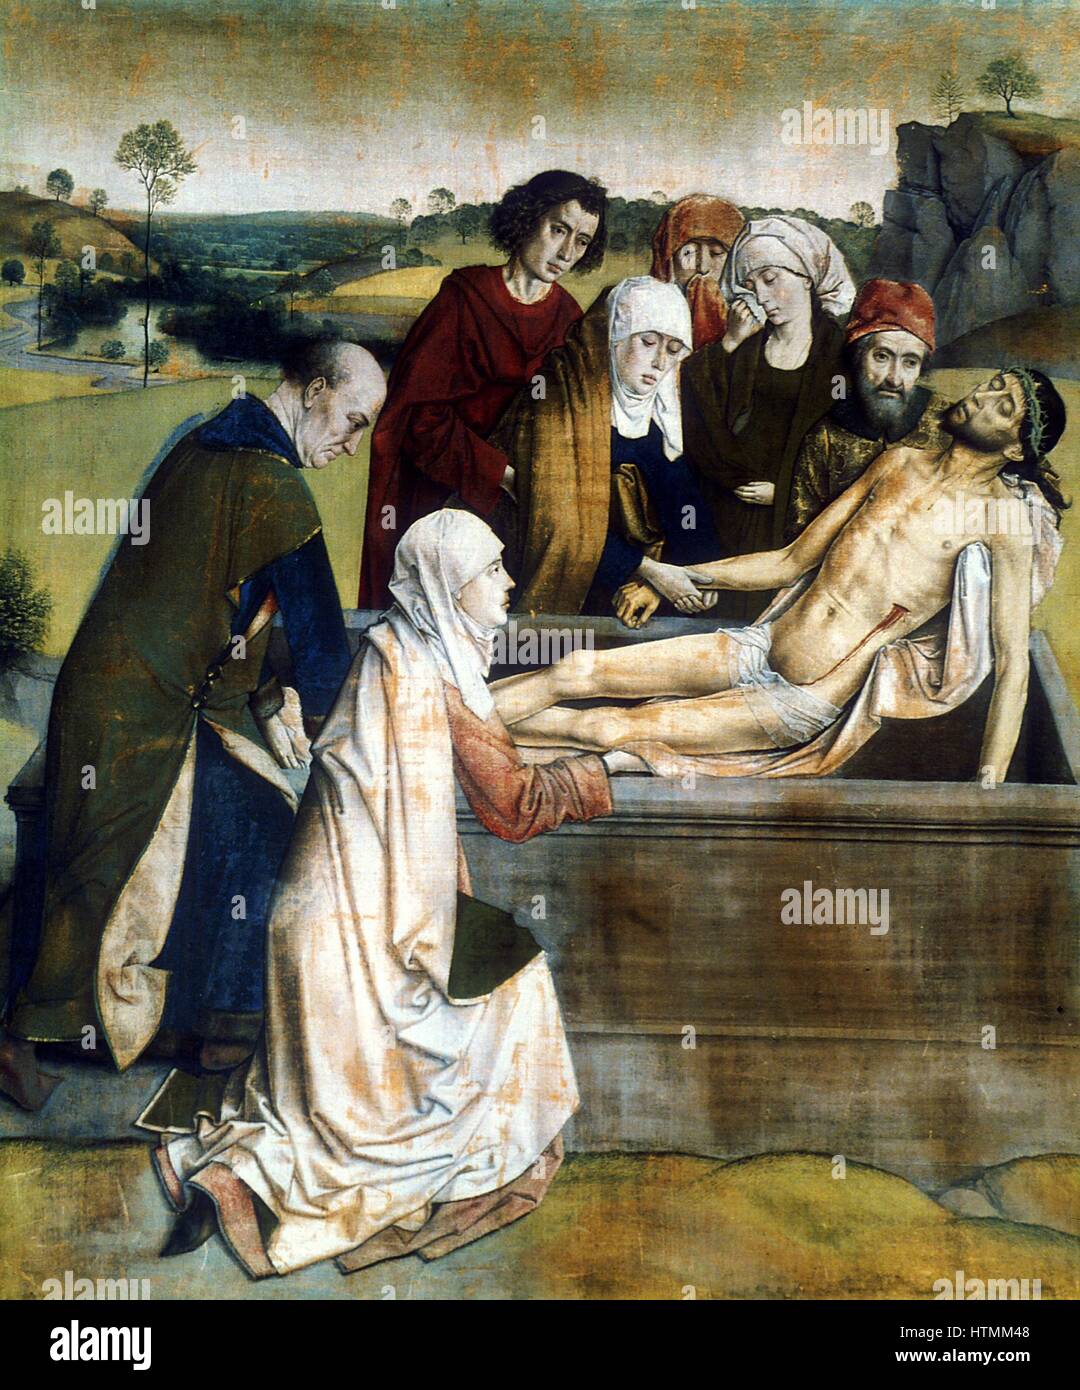 BOUTS, Dierick, or Dirk, or Thierry (c.1415-1475) Dutch painter. 'The Entombment' National Gallery, London Stock Photo